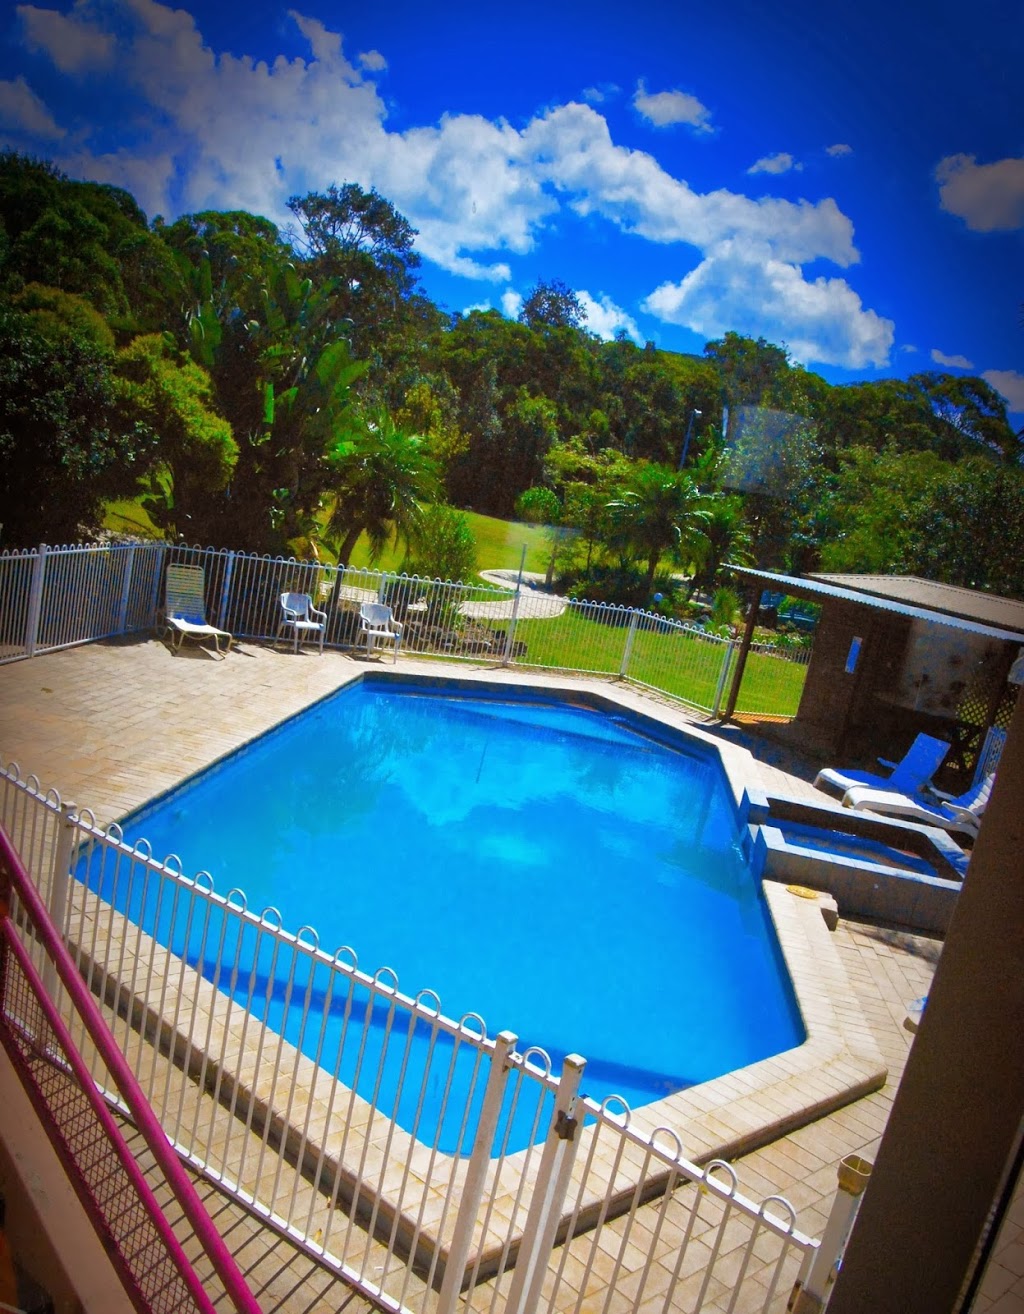 Apollo Resort | lodging | 871 The Entrance Rd, Wamberal NSW 2260, Australia | 0243852099 OR +61 2 4385 2099